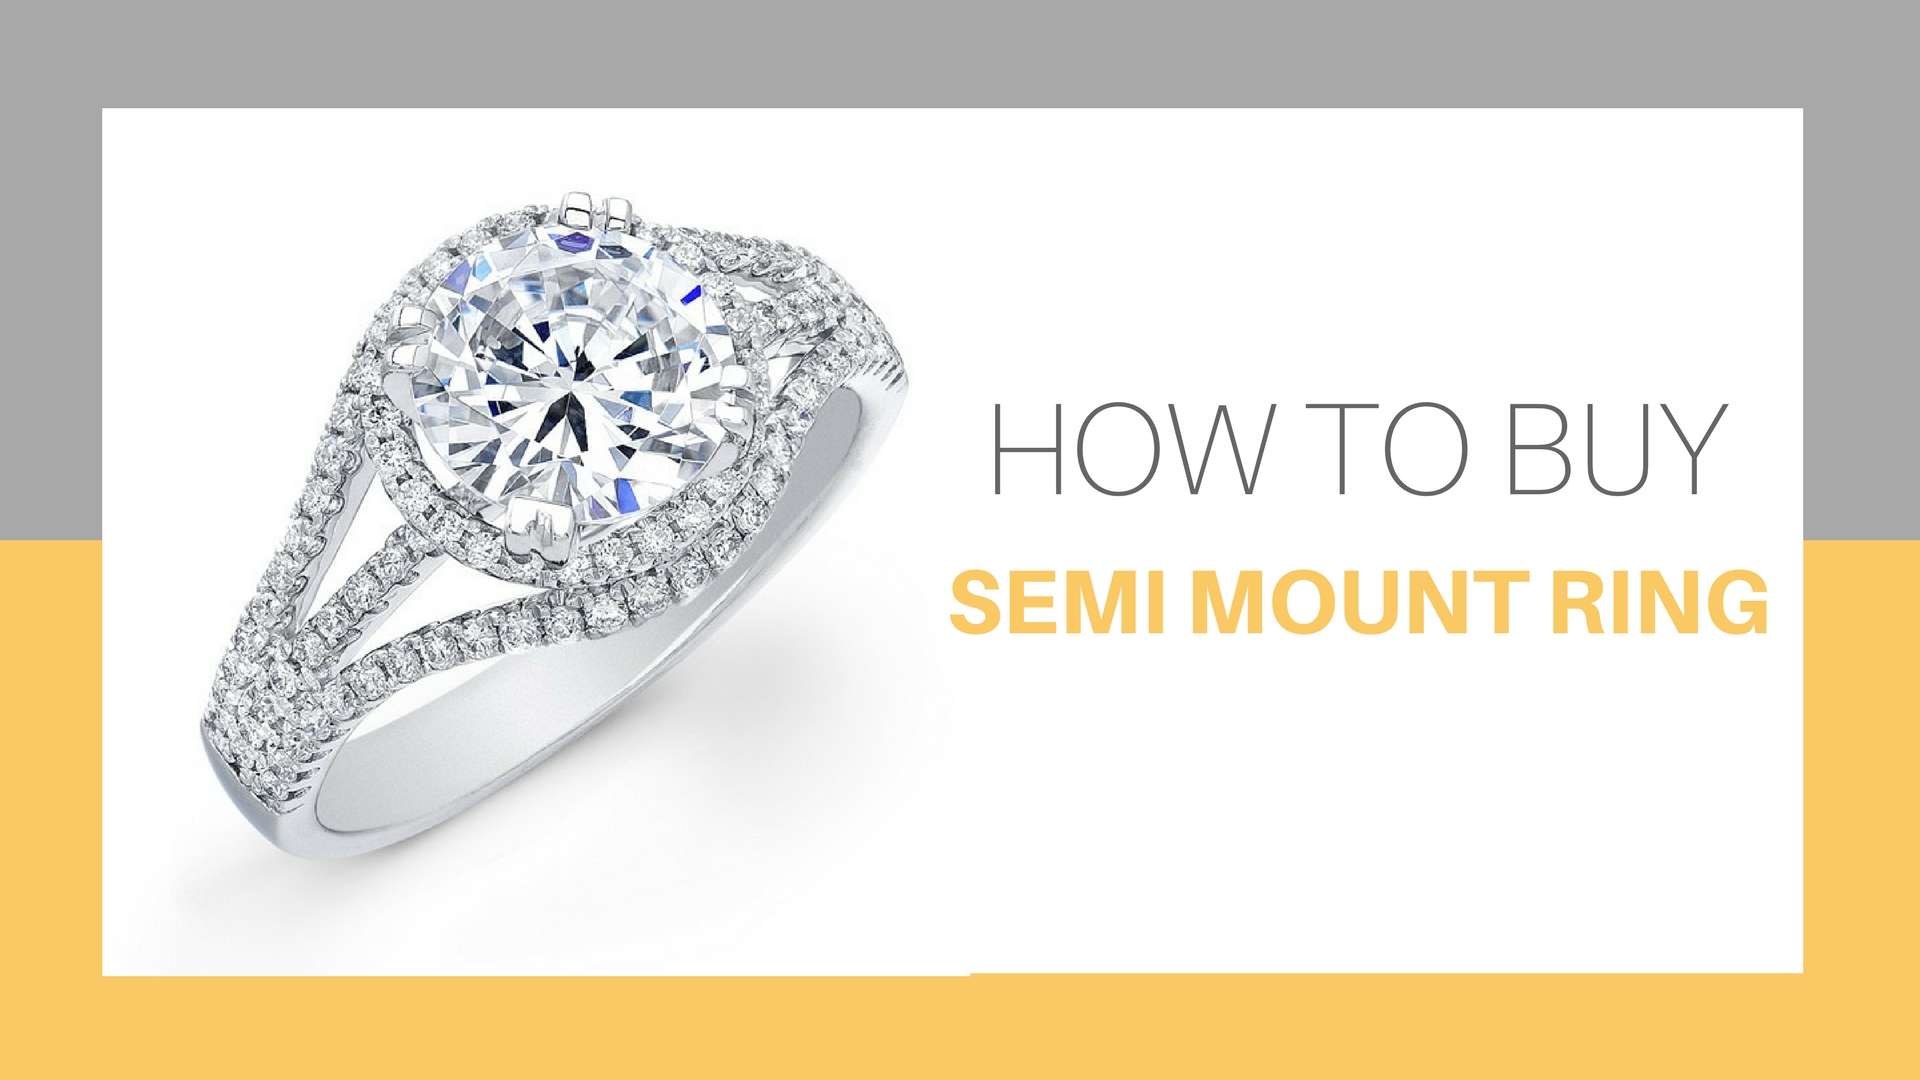 How To Buy Semi Mount Ring For Engagement - Dazzling Rock